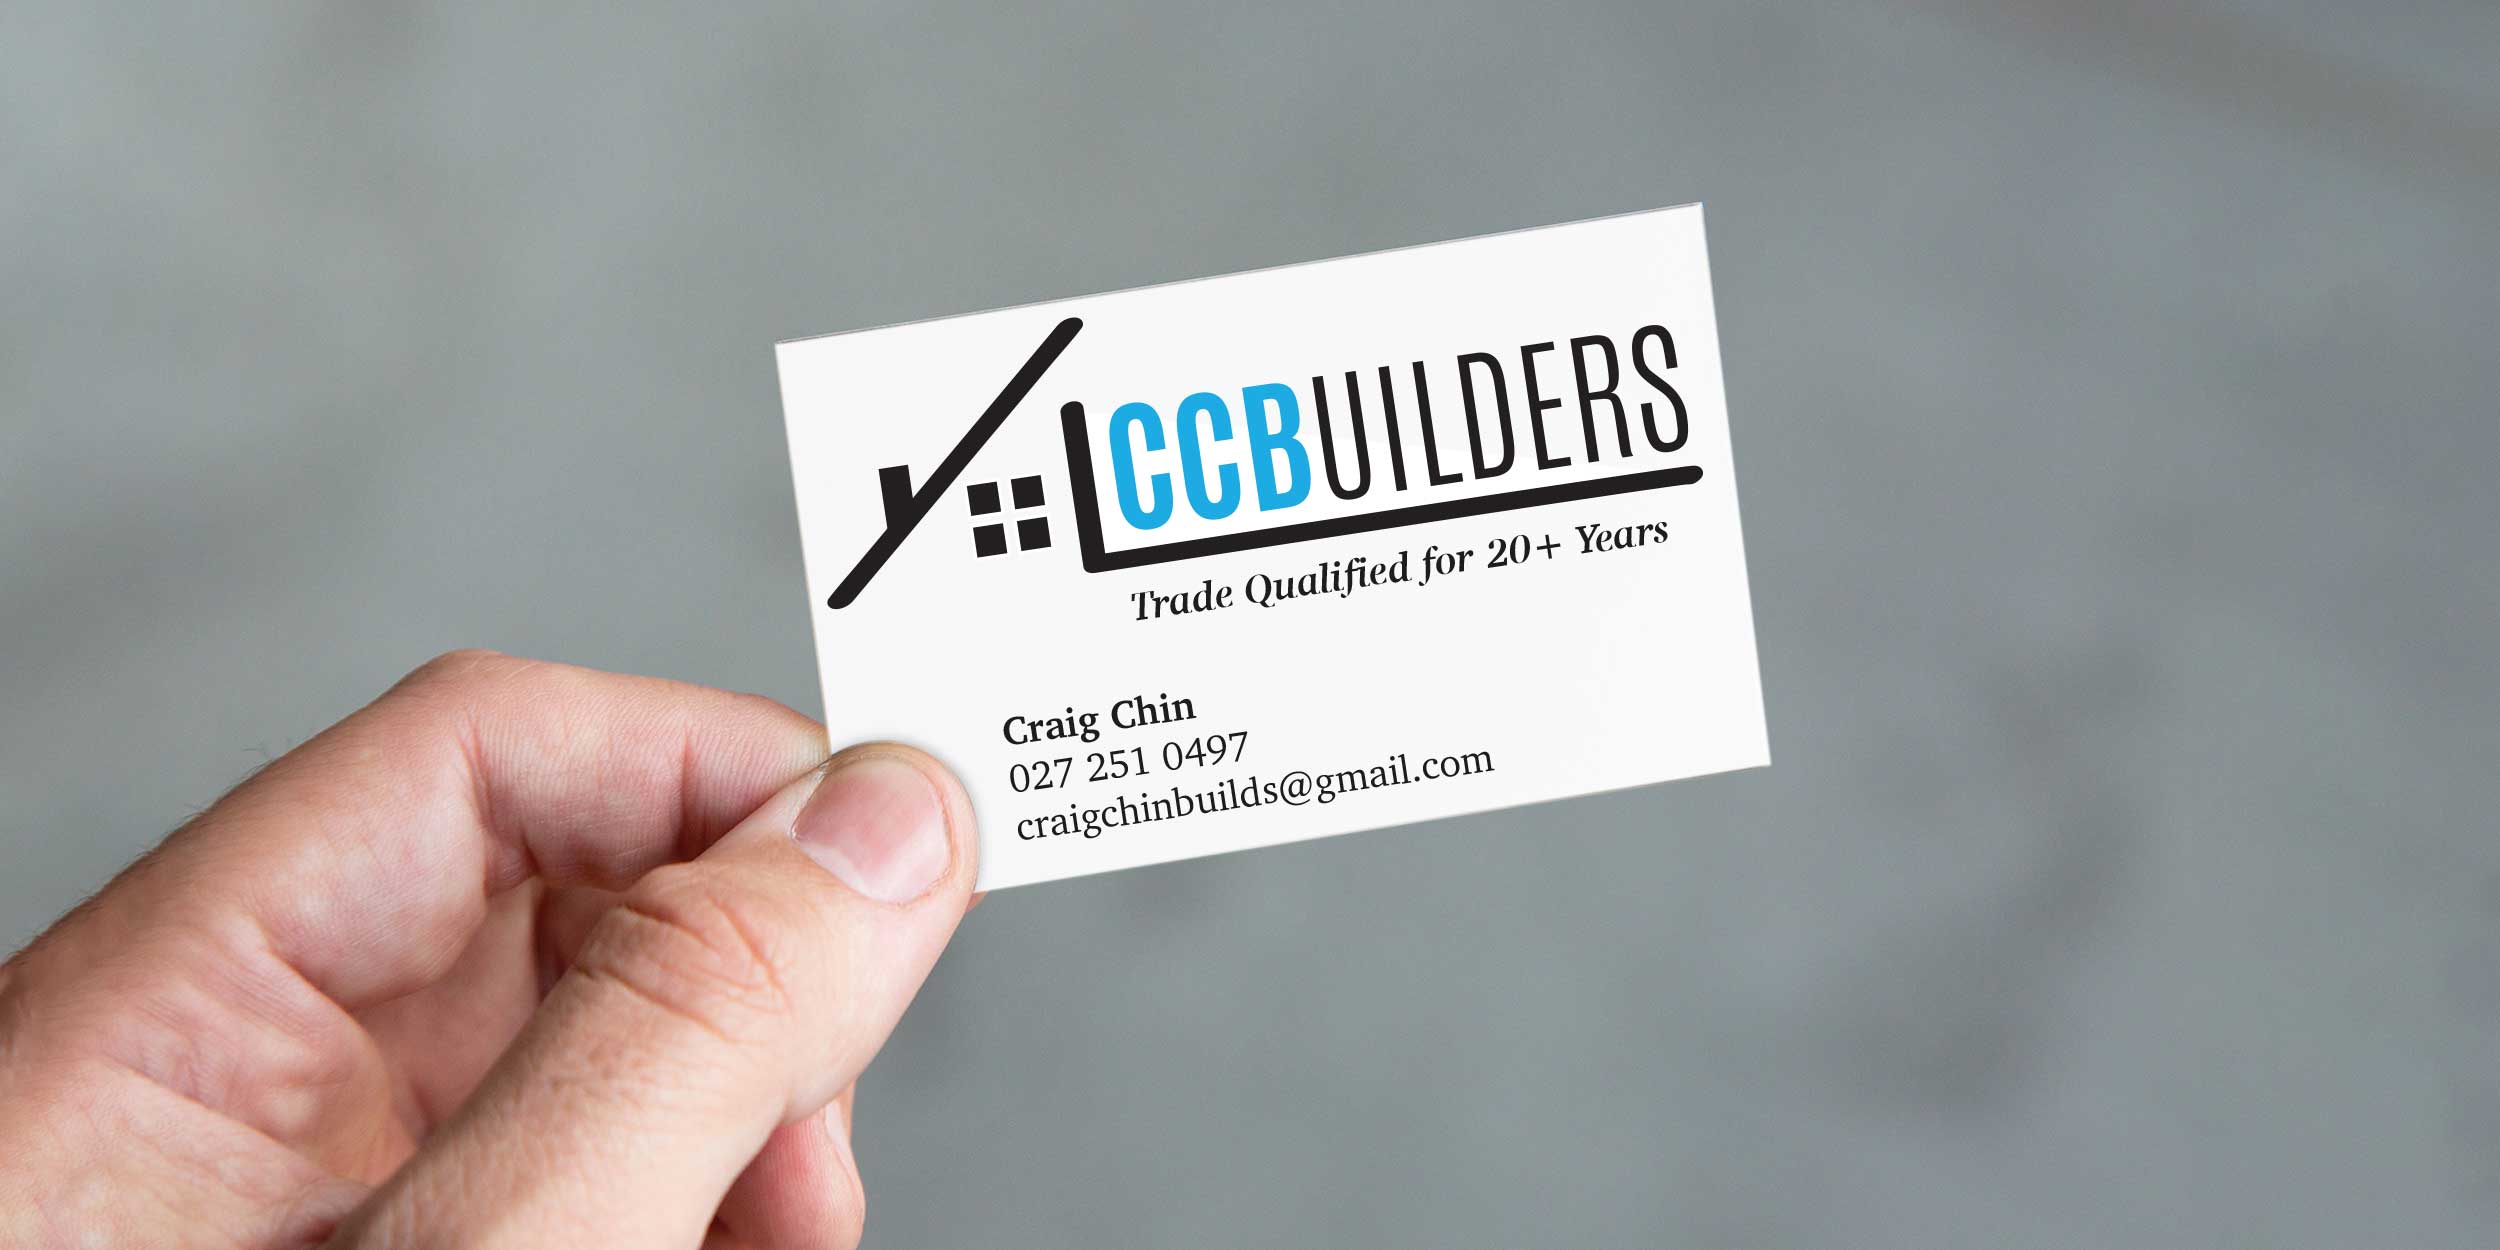 CCB Builders Business Card Design